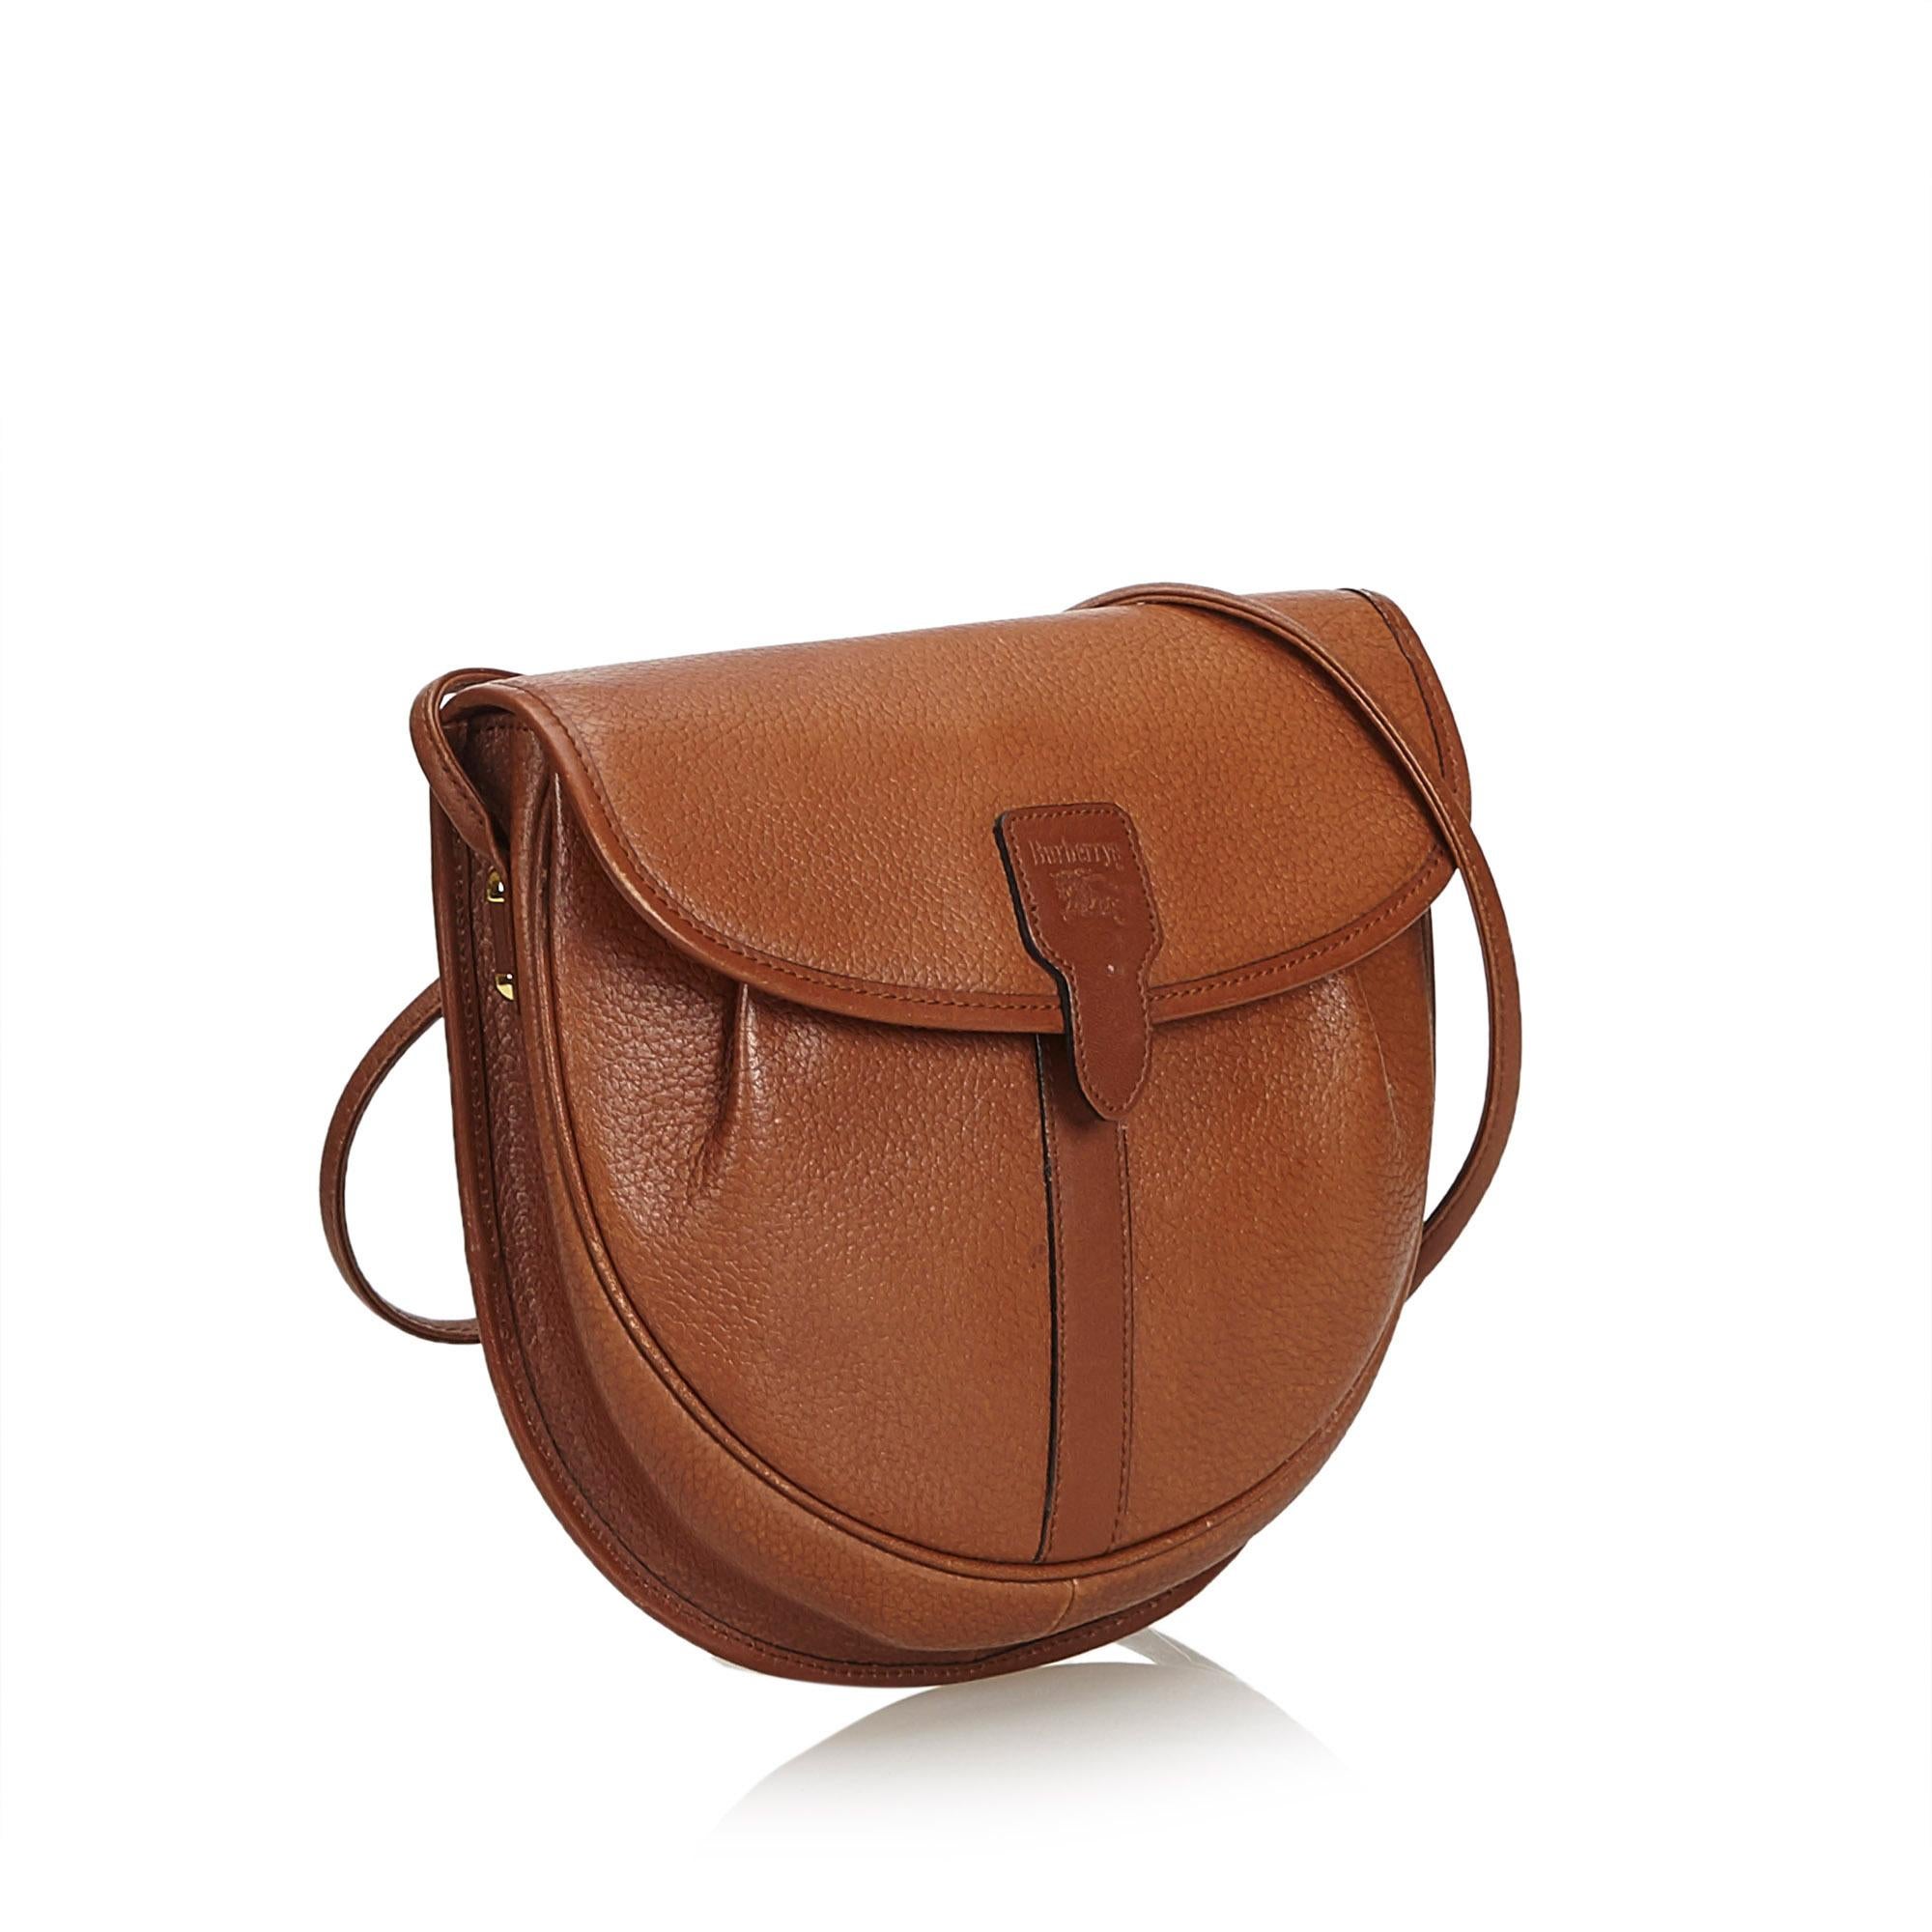 This crossbody bag features a leather body, an adjustable flat leather strap, a top flap with a magnetic snap button closure, and an interior open pocket. It carries as B+ condition rating.

Inclusions: 
This item does not come with